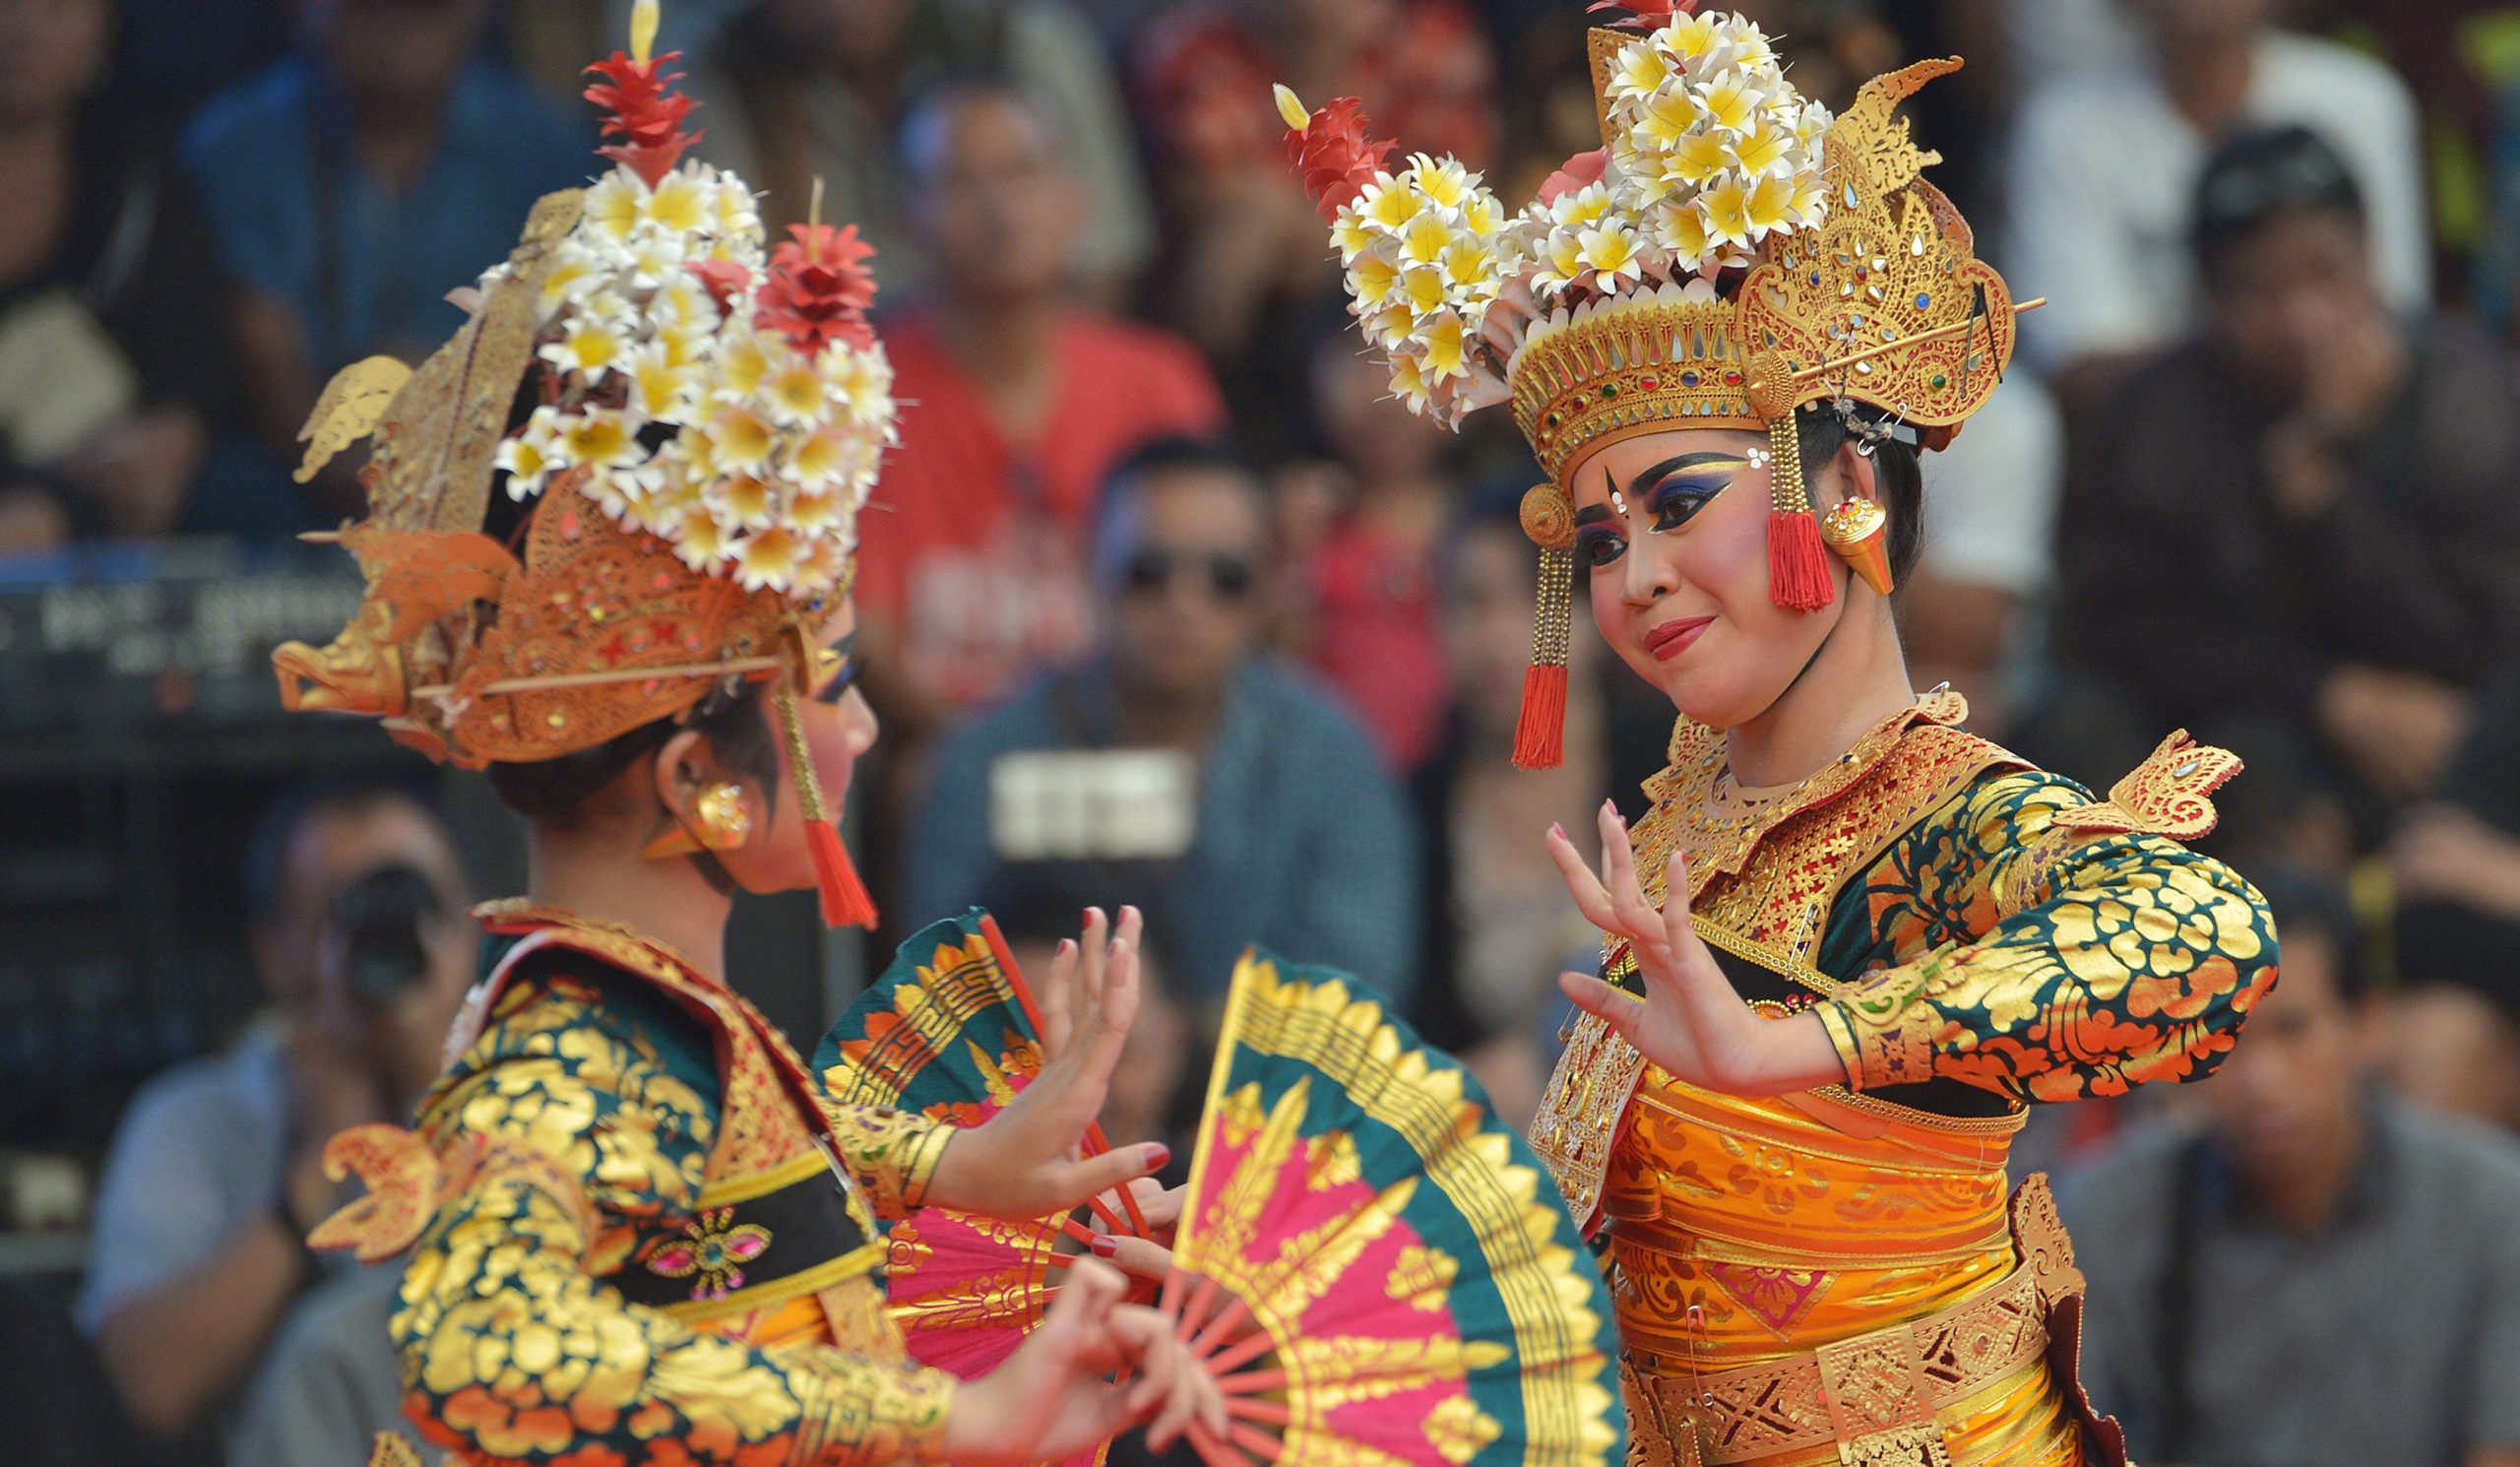 9 Traditional Dances From Bali - FactsofIndonesia.com